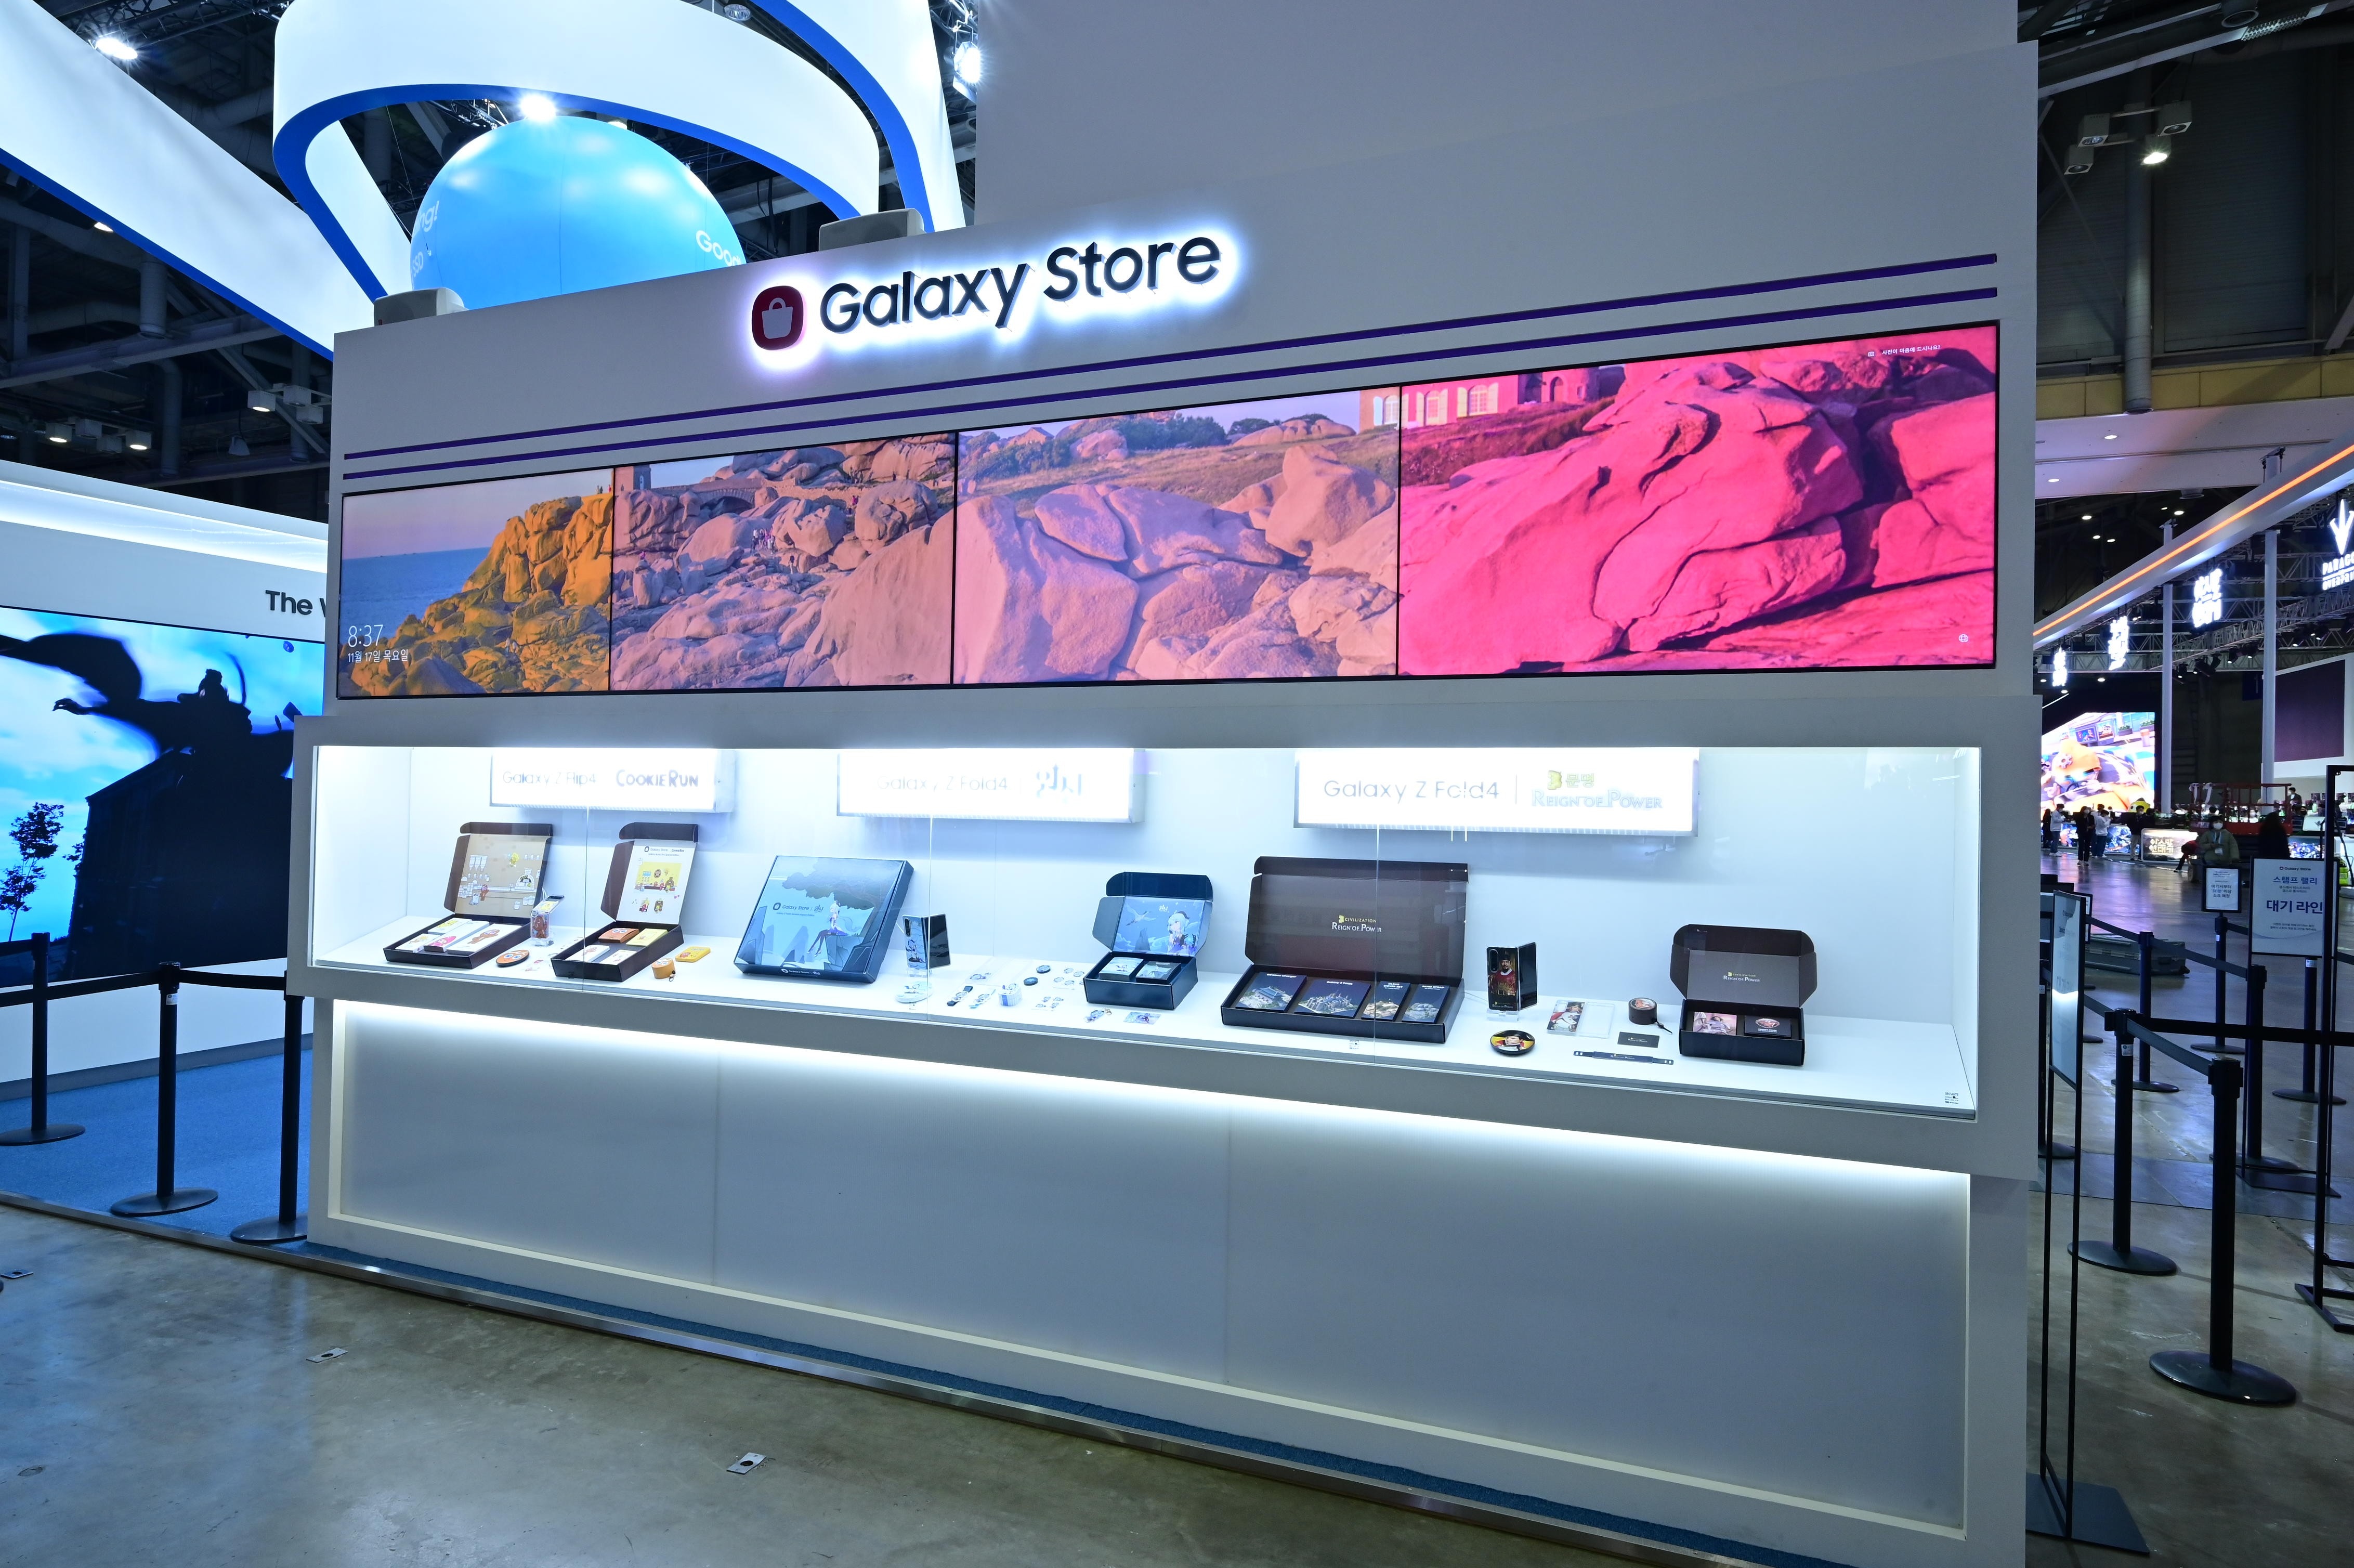 View of the Galaxy Store booth inside Samsung Electronics' brand booth